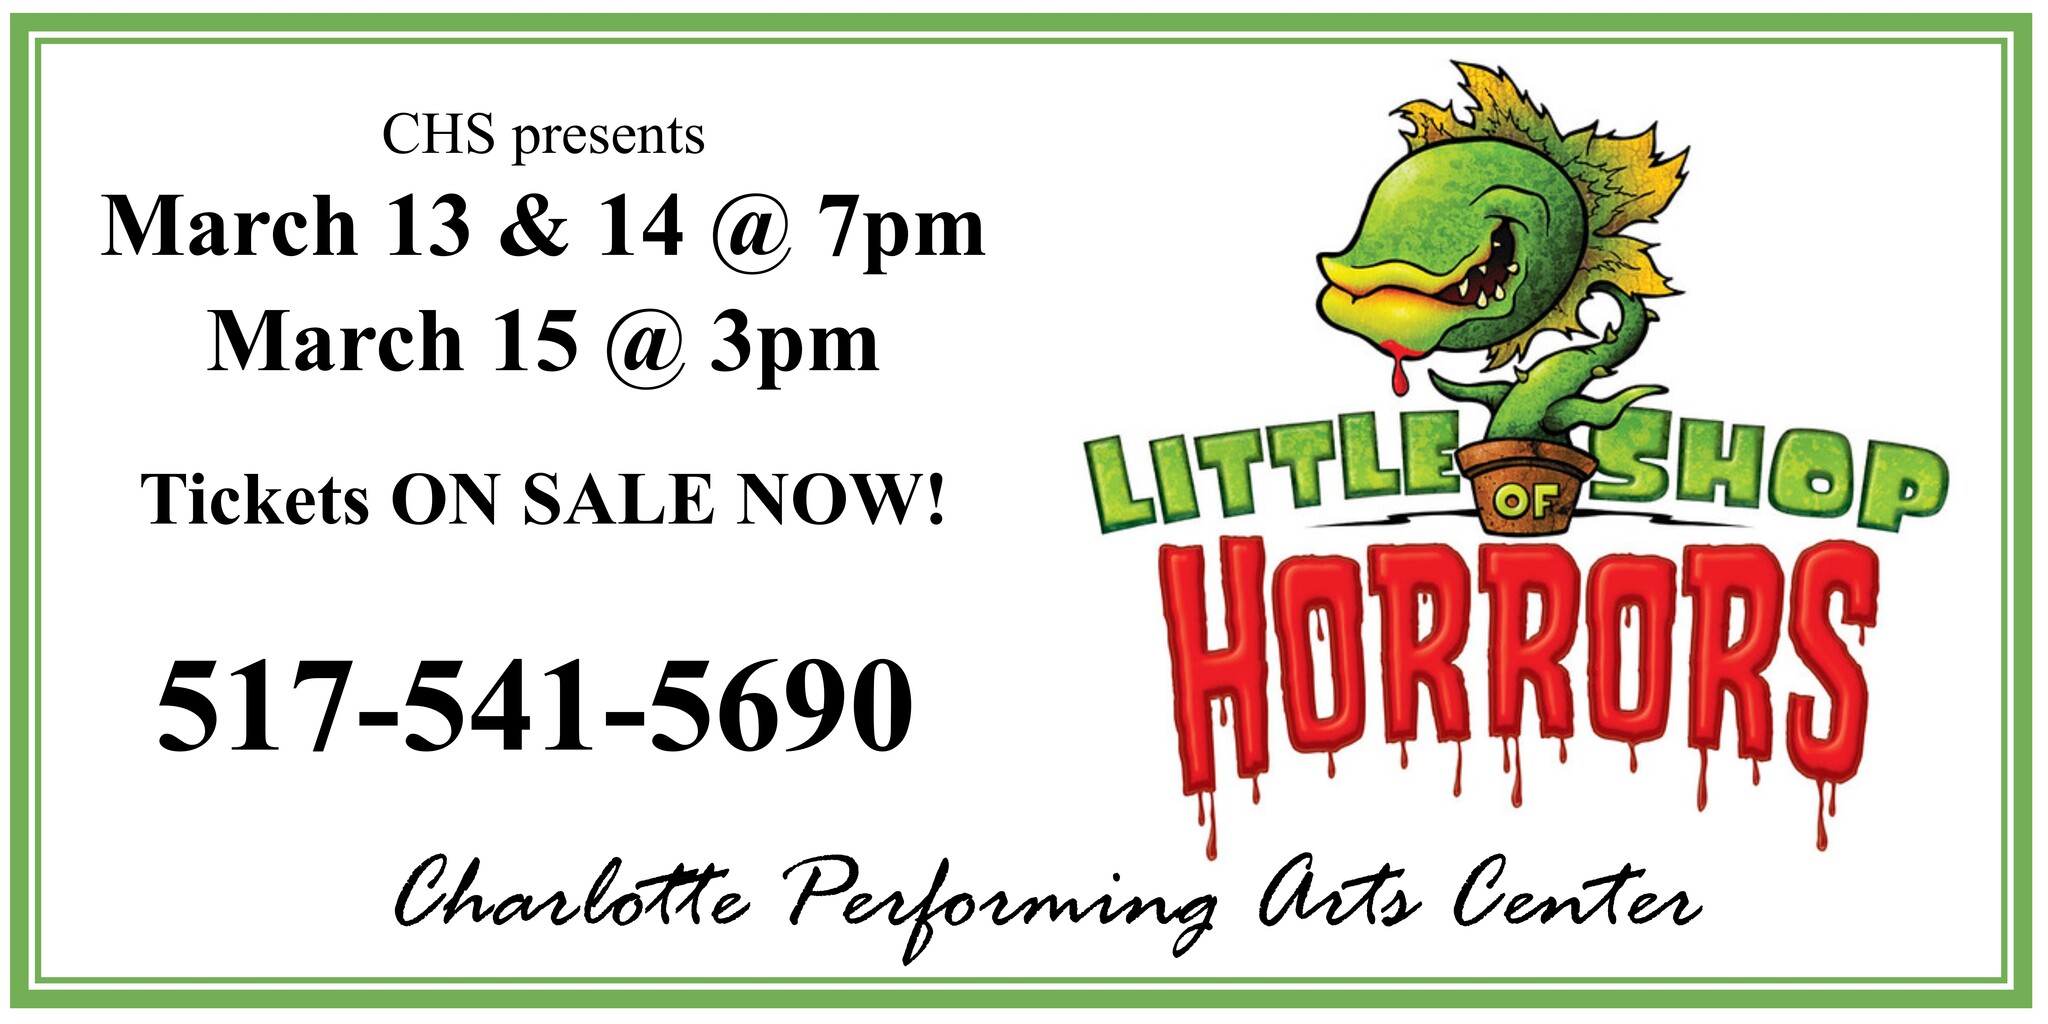 Little Shop of Horrors at CPAC March 13-15